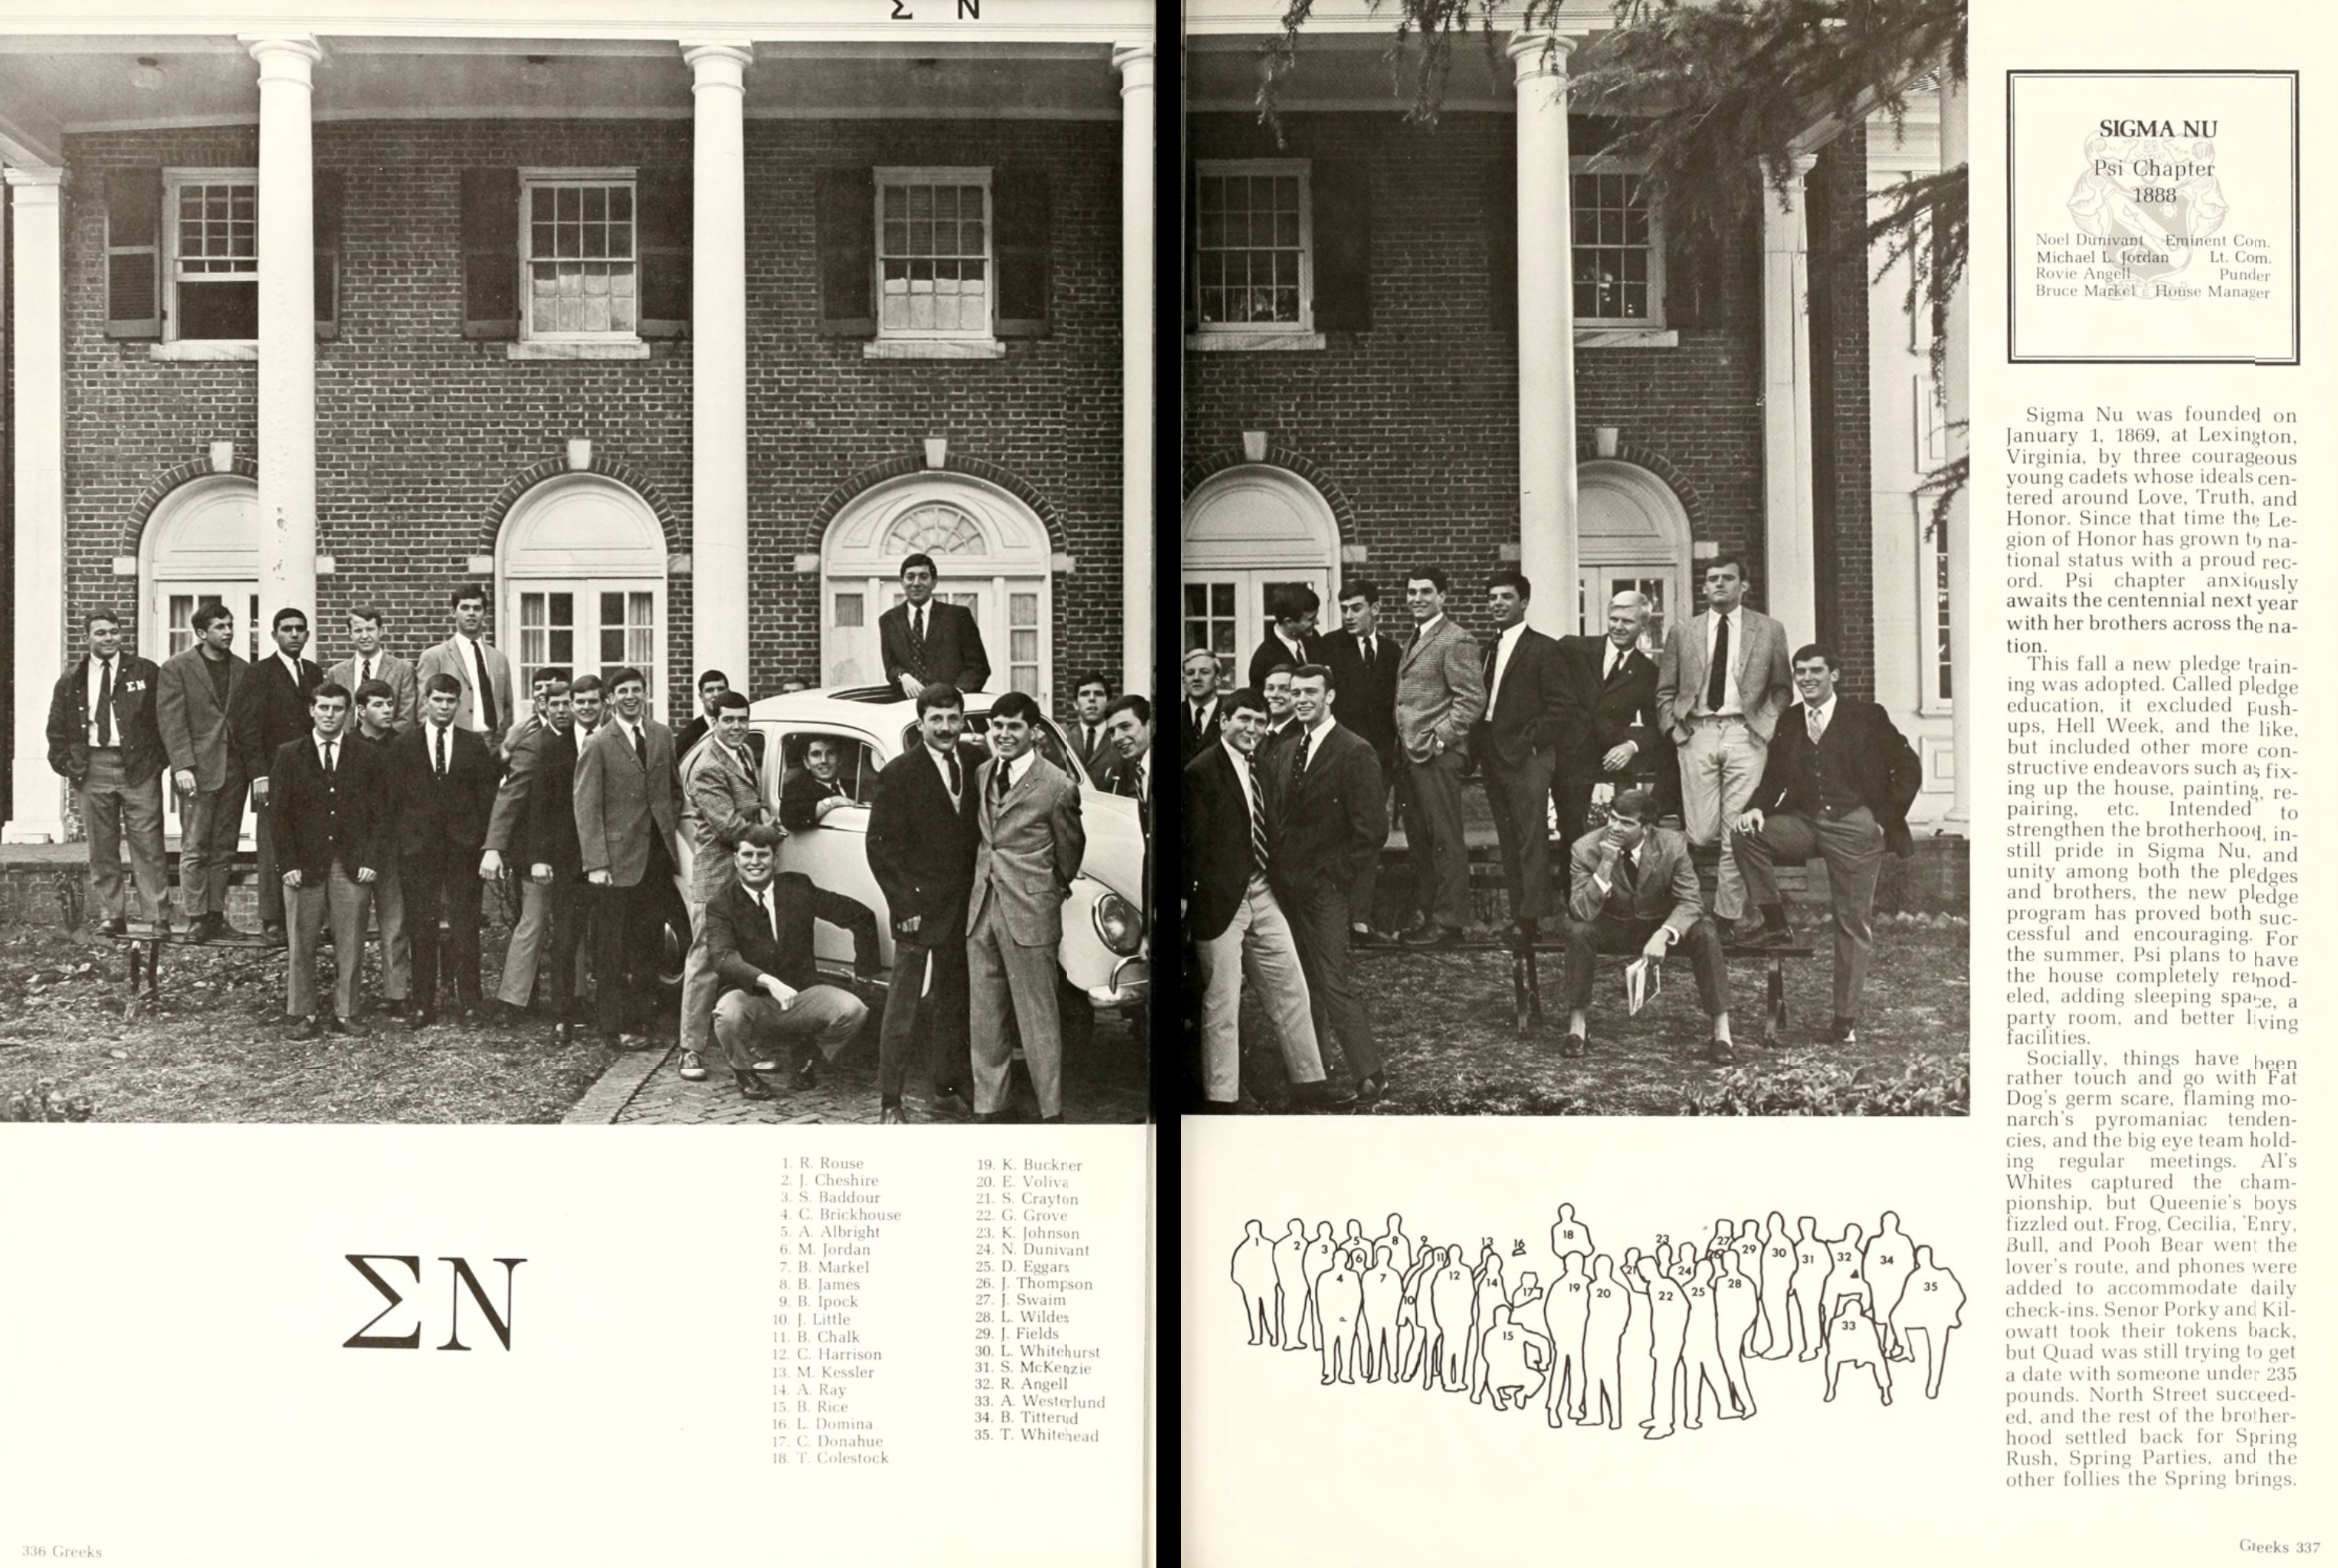 Throwback to Sigma Nu in 1968